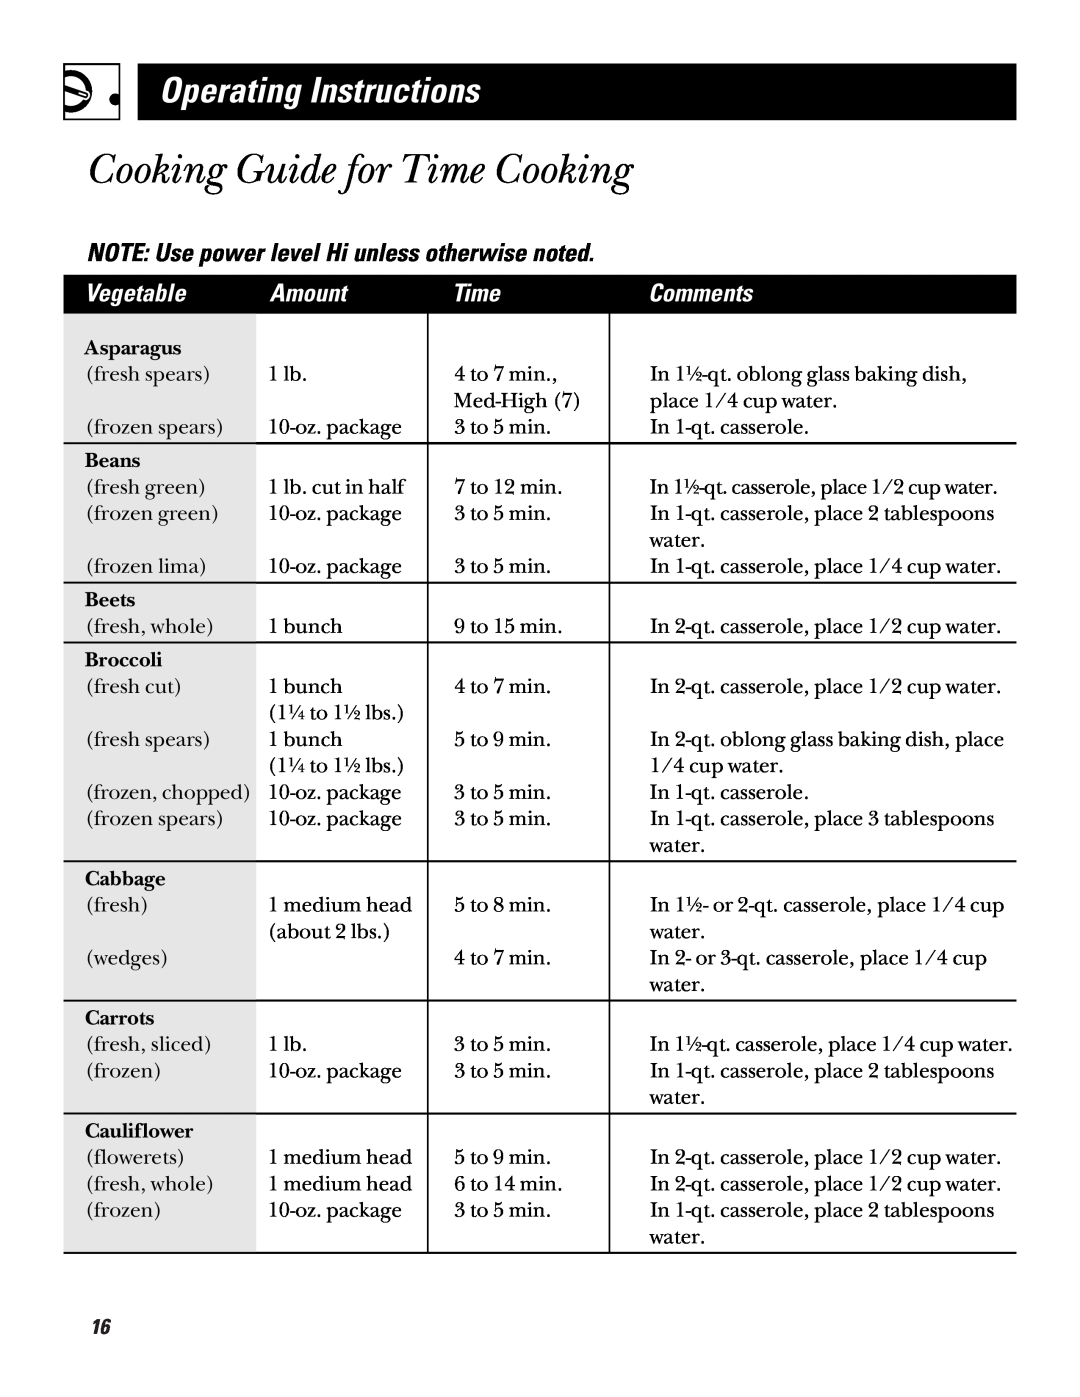 GE JE835 Cooking Guide for Time Cooking, NOTE Use power level Hi unless otherwise noted, Vegetable, Amount, Comments 